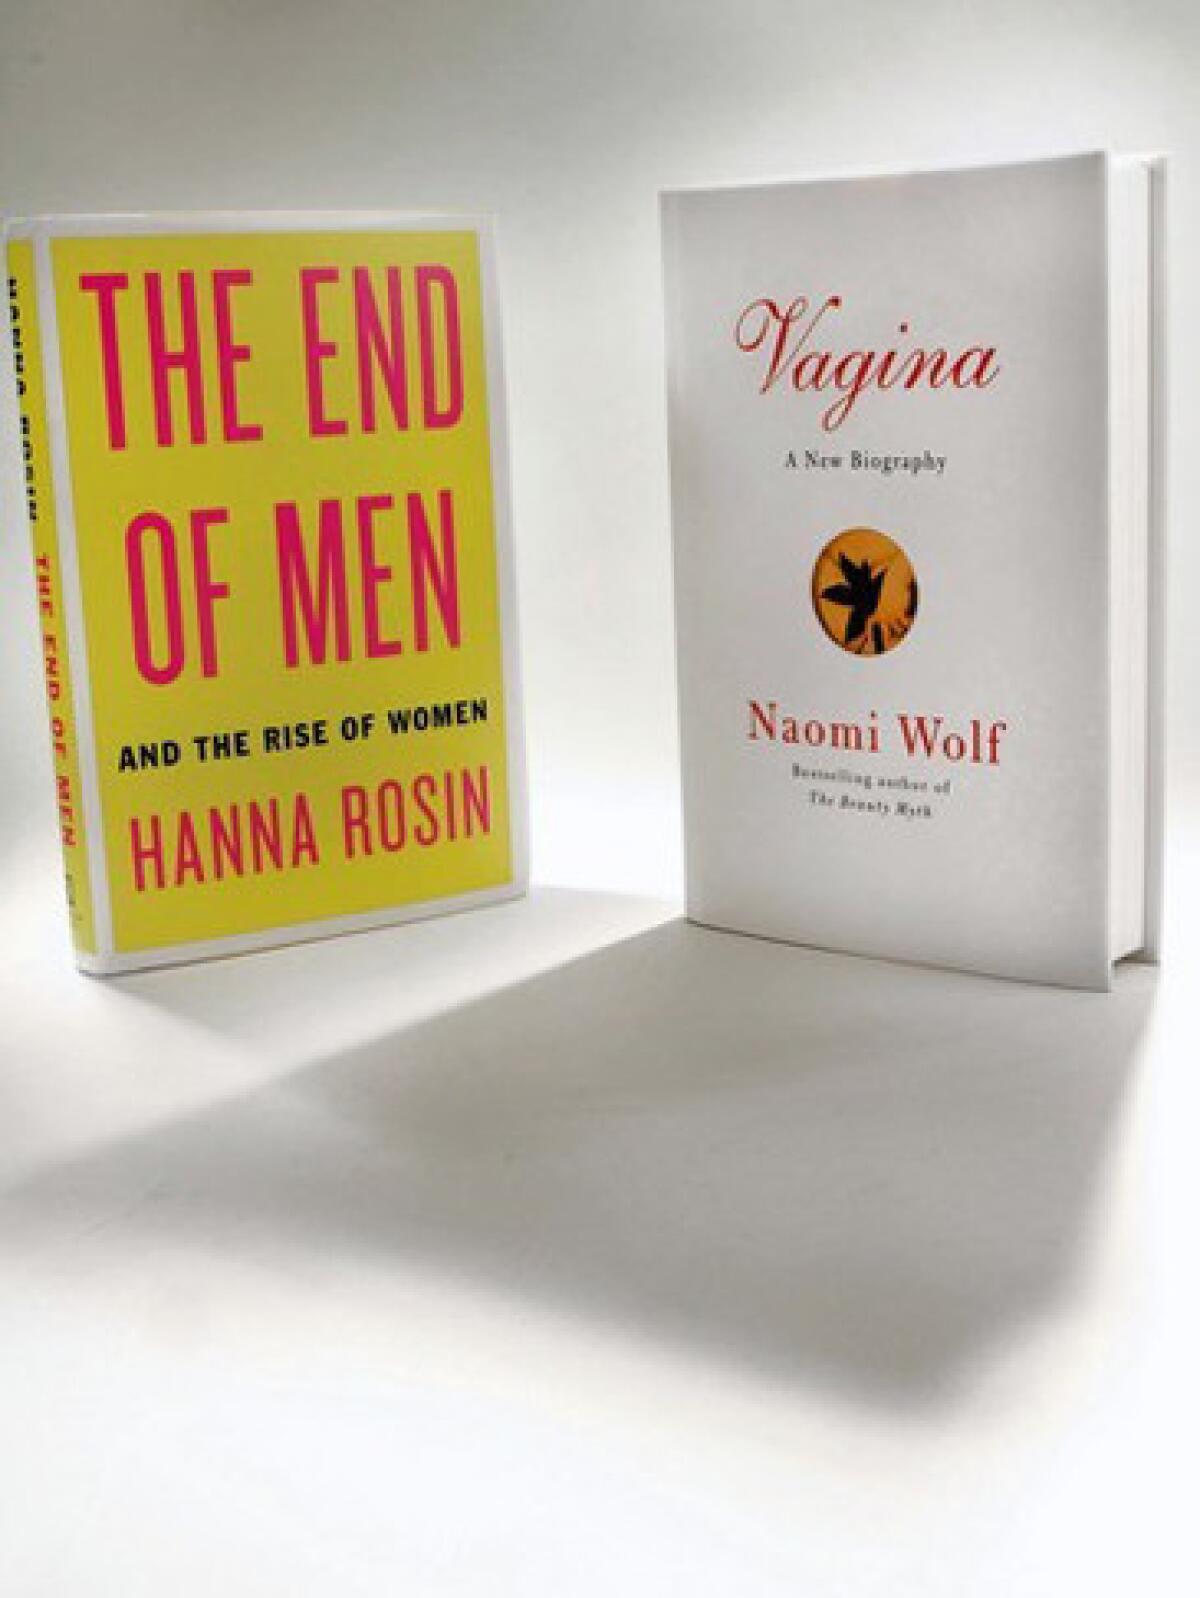 "The End of Men" by Hanna Rosin and "Vagina" by Naomi Wolf.